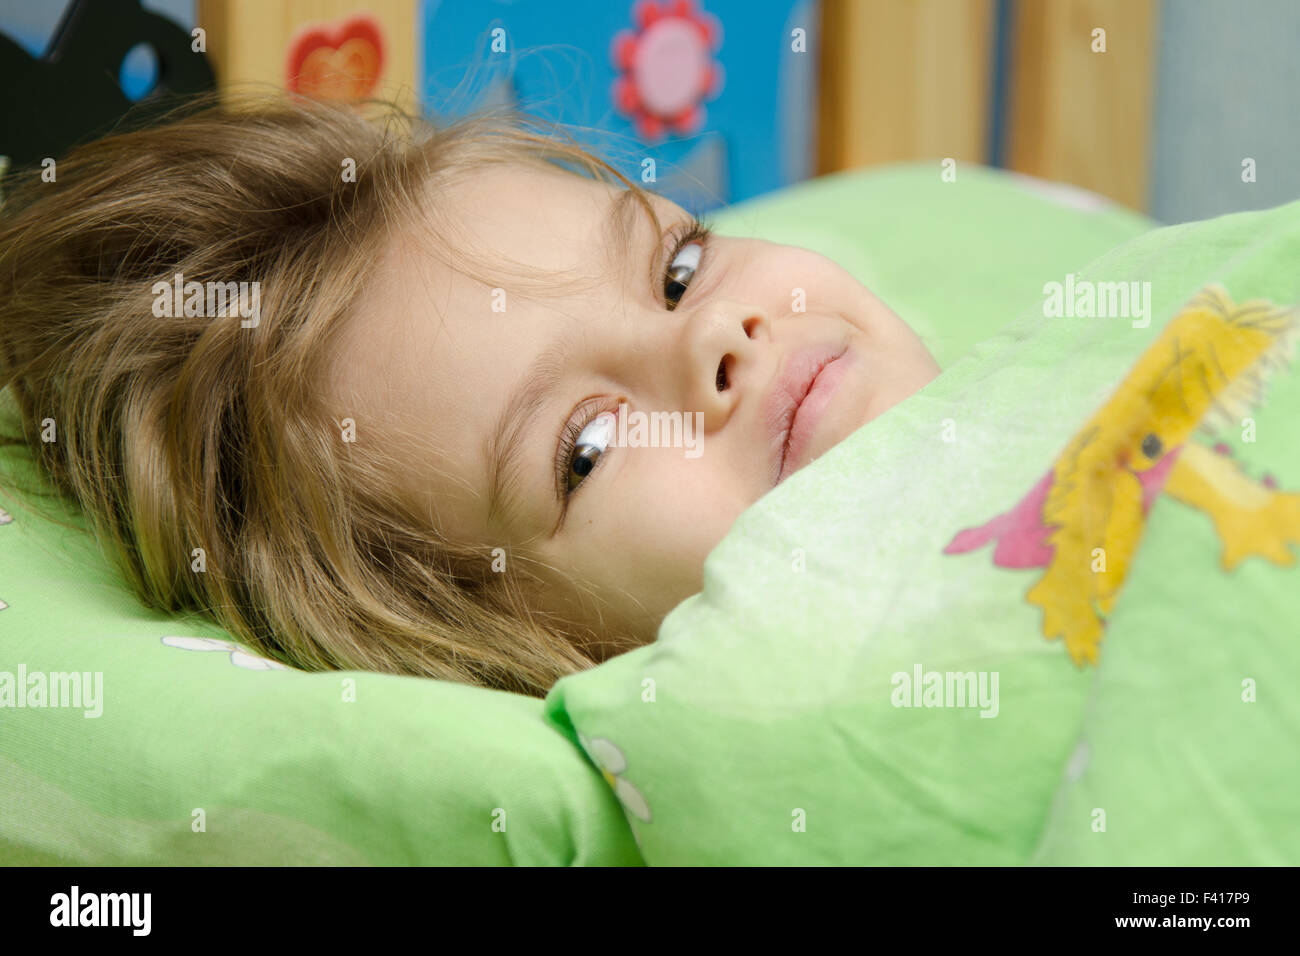 The girl woke up in bed Stock Photo